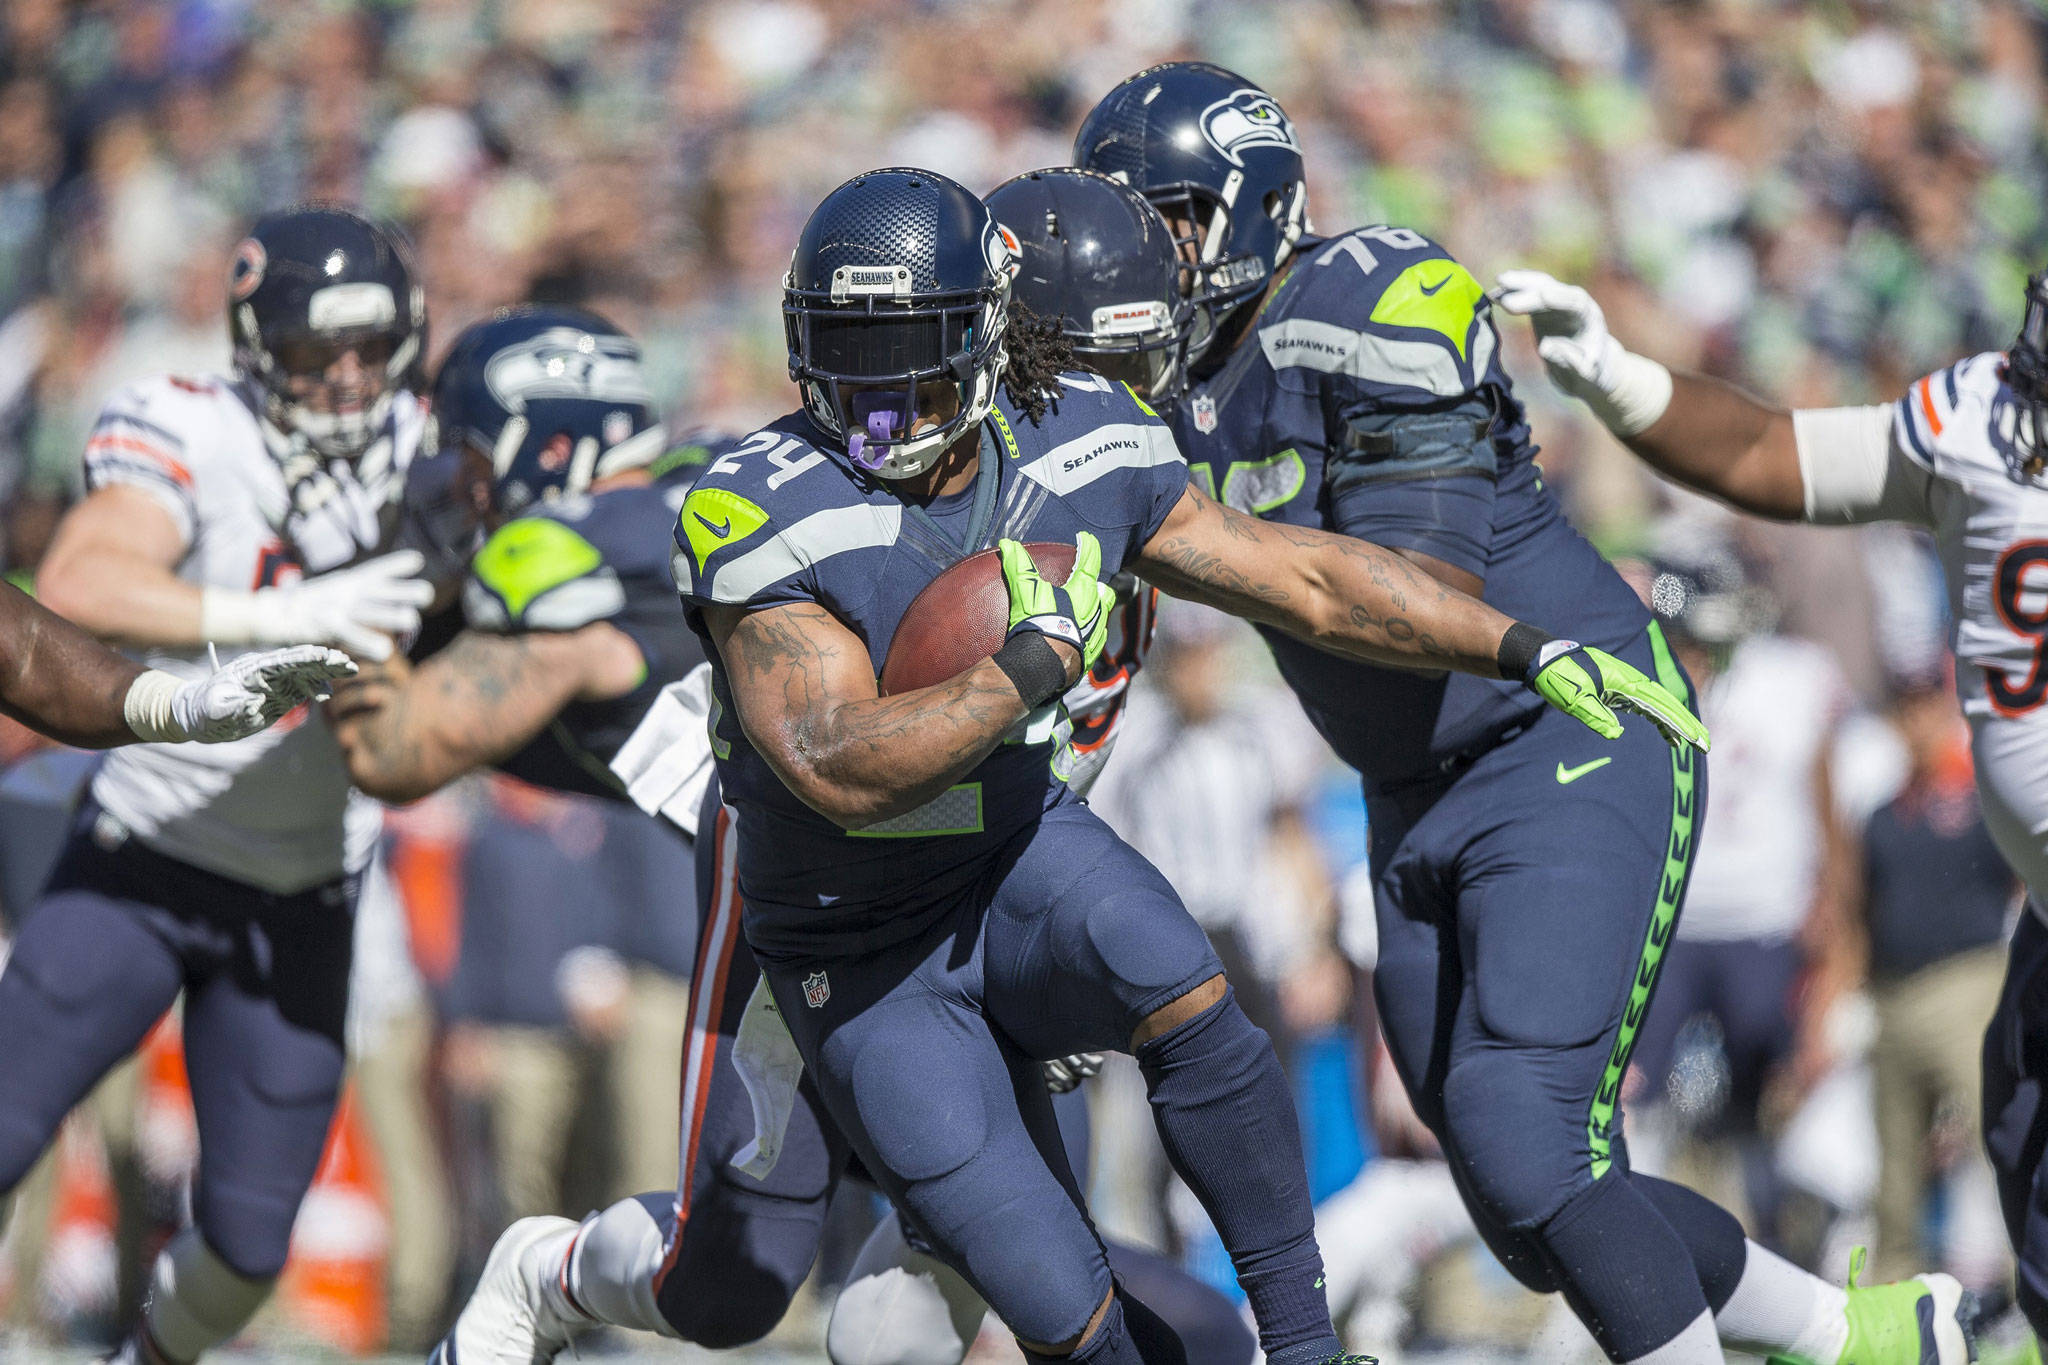 (Dean Rutz | Seattle Times) Marshawn Lynch, who retired from the NFL at the end of the 2015 season in Seattle, has reportedly worked out a new deal with his hometown Oakland Raiders and is awaiting a trade from Seattle to Oakland on Friday.